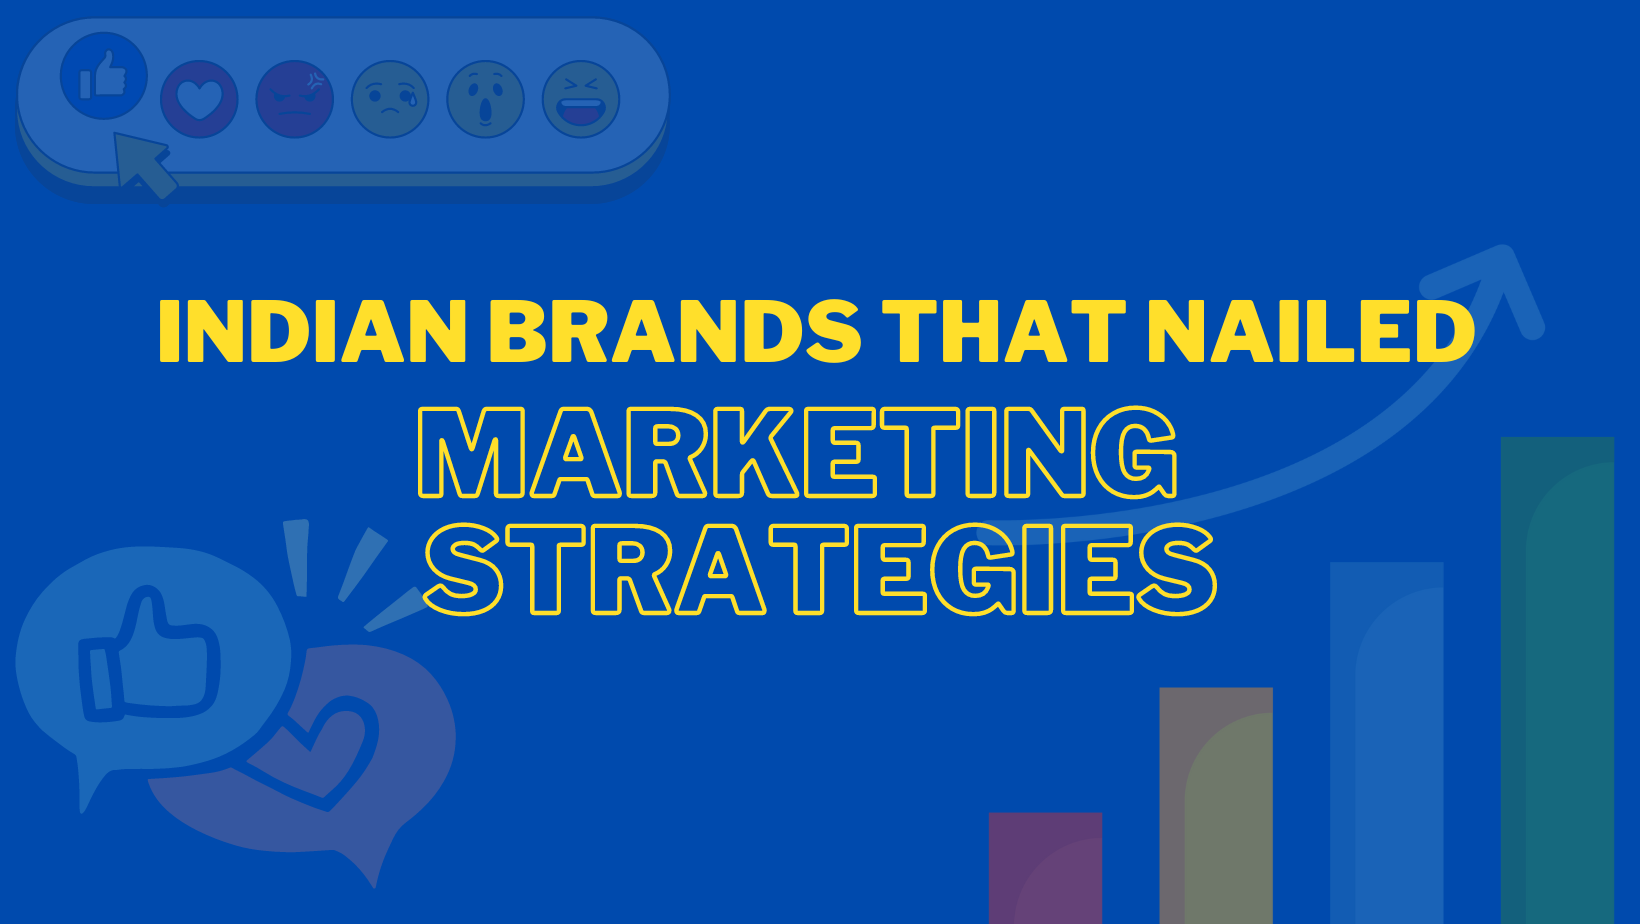 Indian brands that nailed marketing strategies- Crawling Chameleon